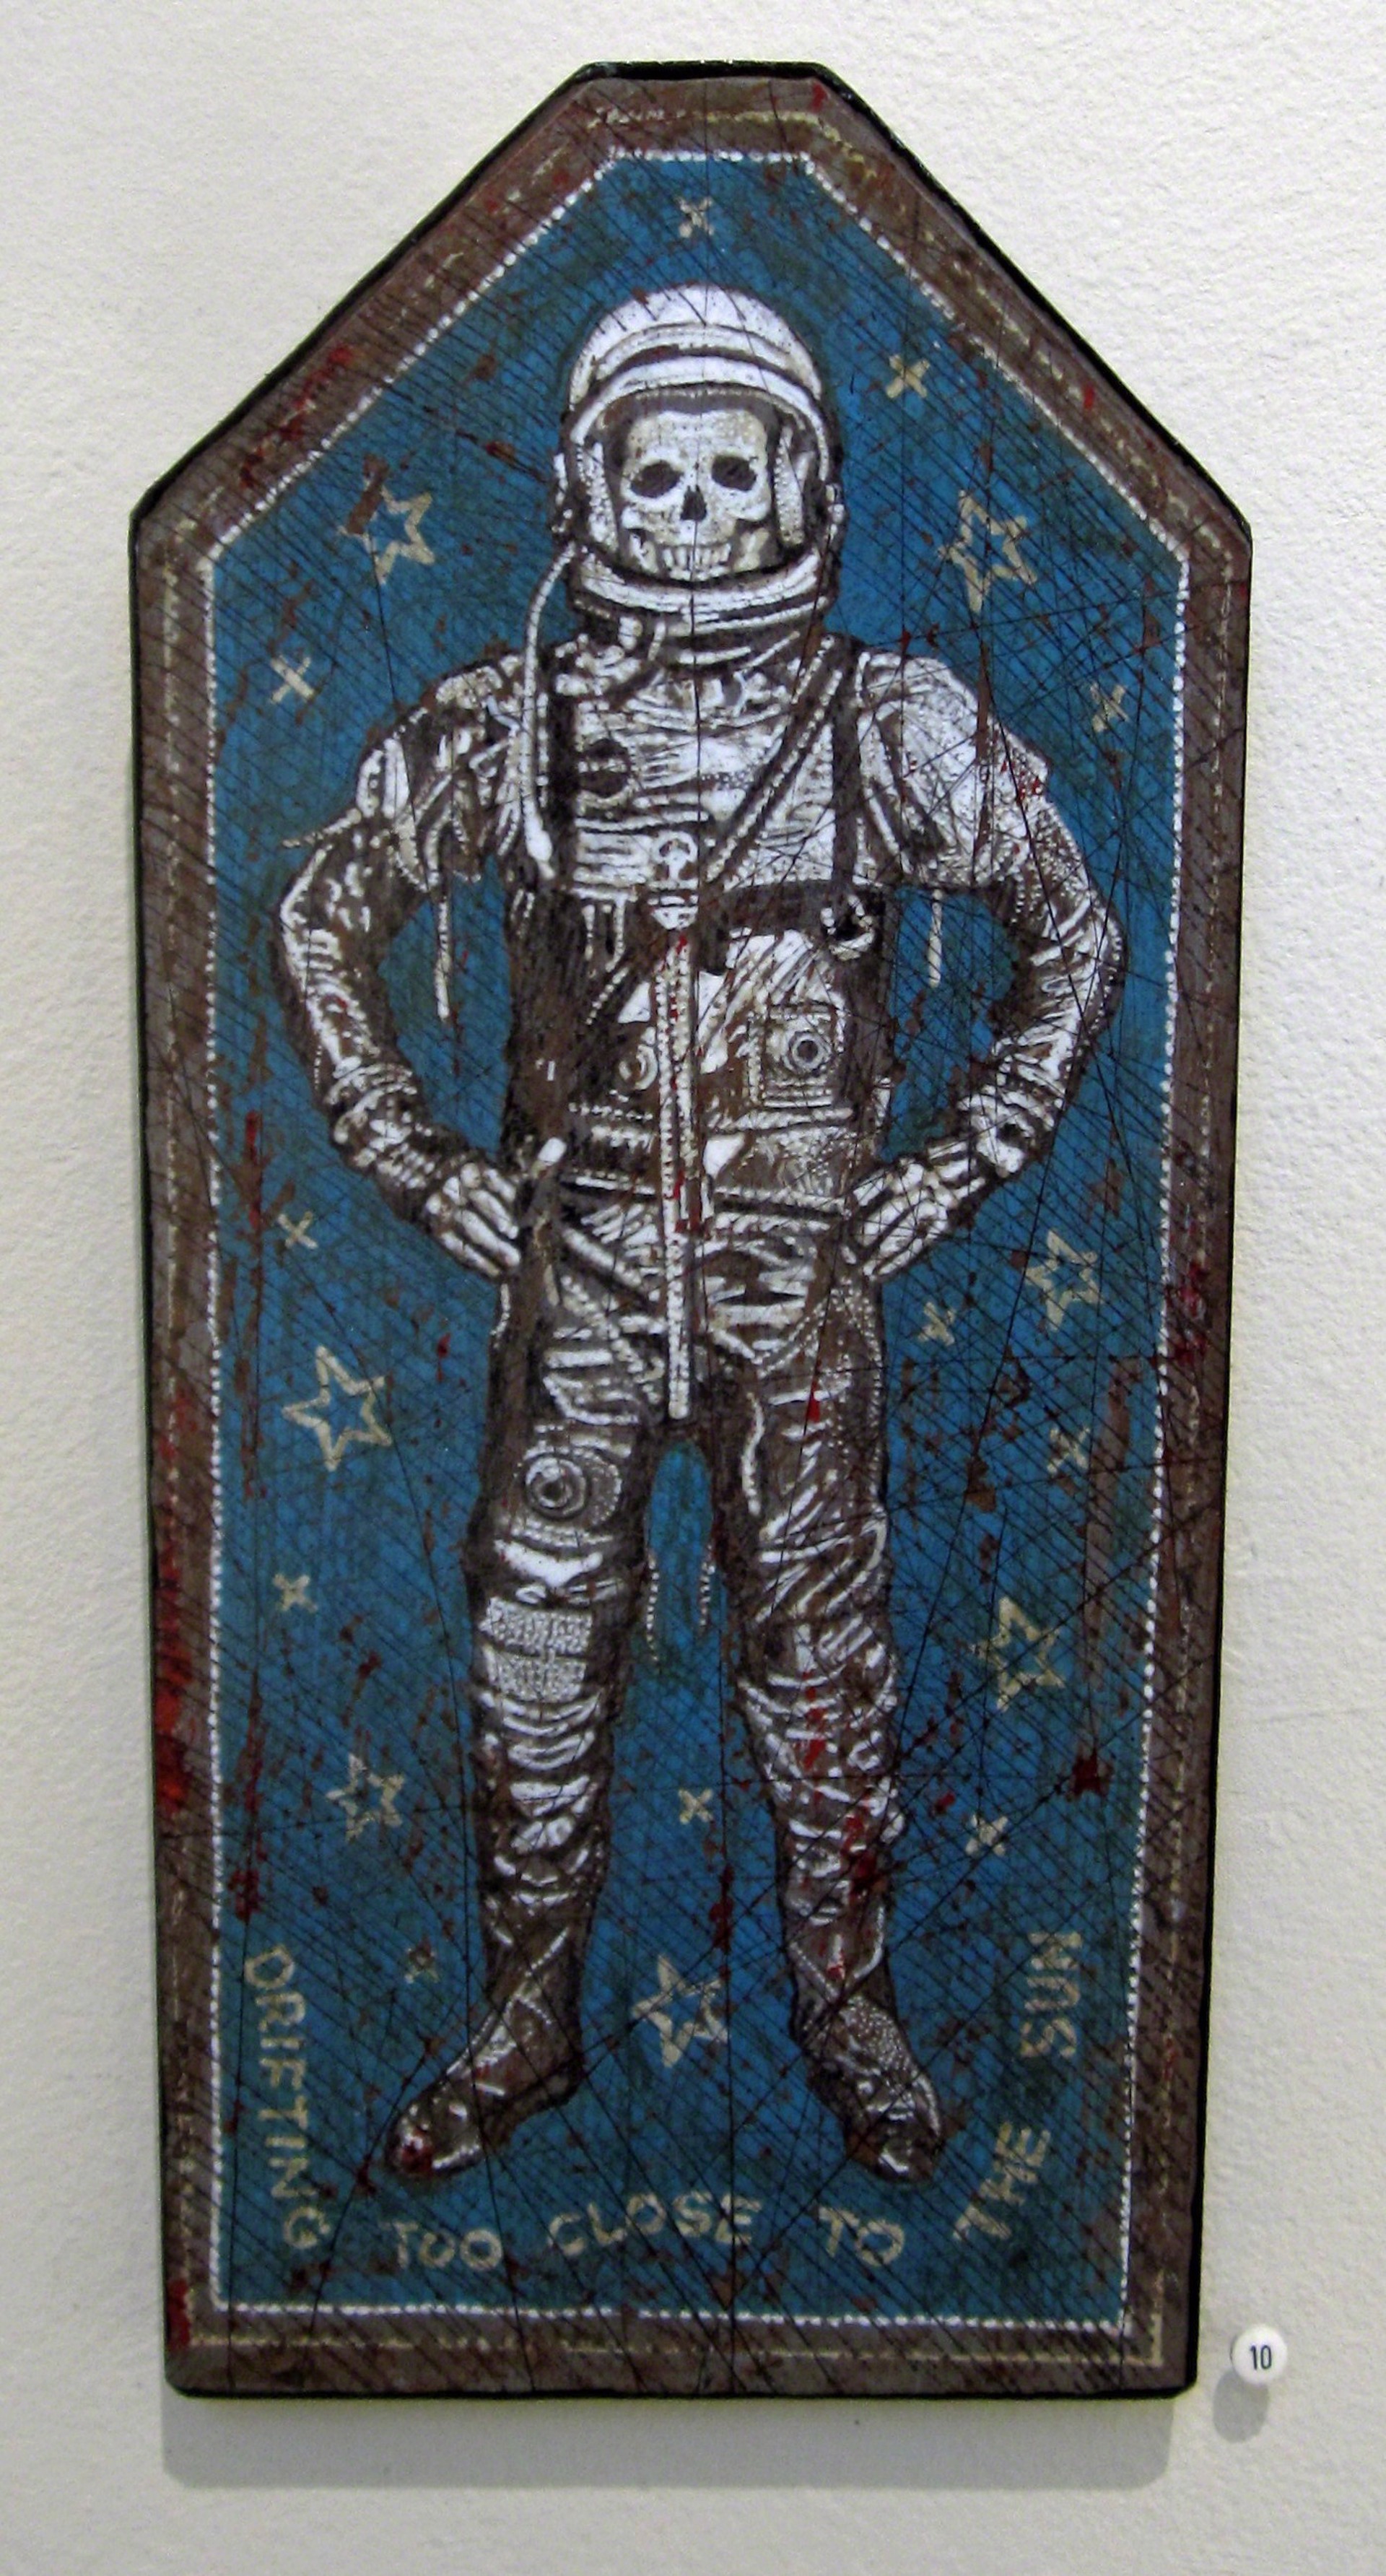 Drifting Too Close to the Sun (A.P.) by Jon Langford